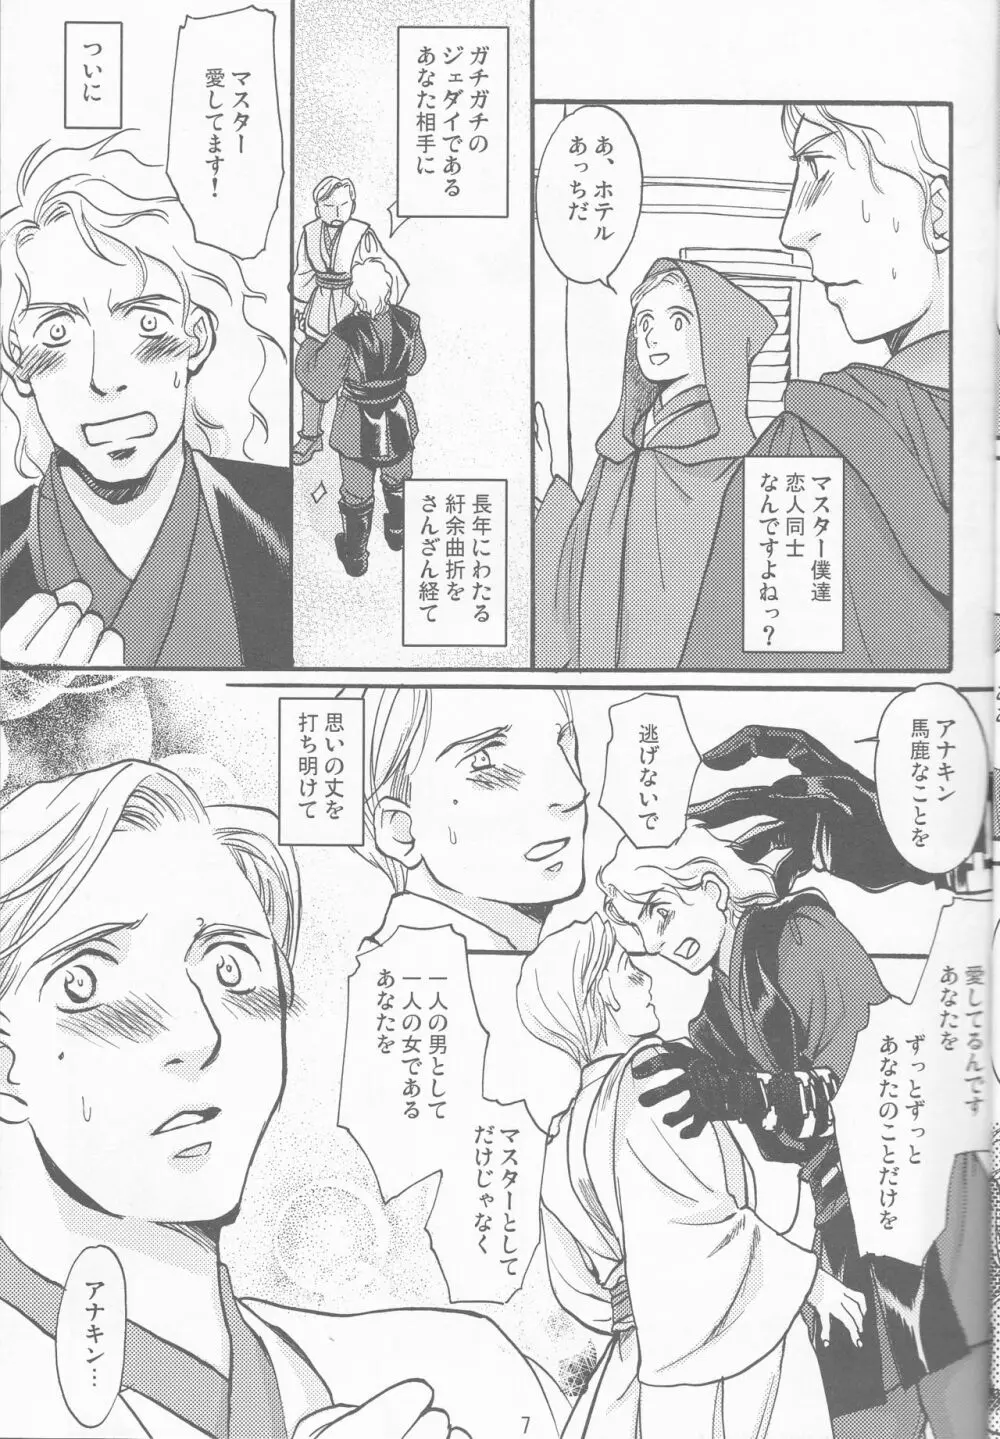 Obi Female Transformation Book 1 of 2 Page.7